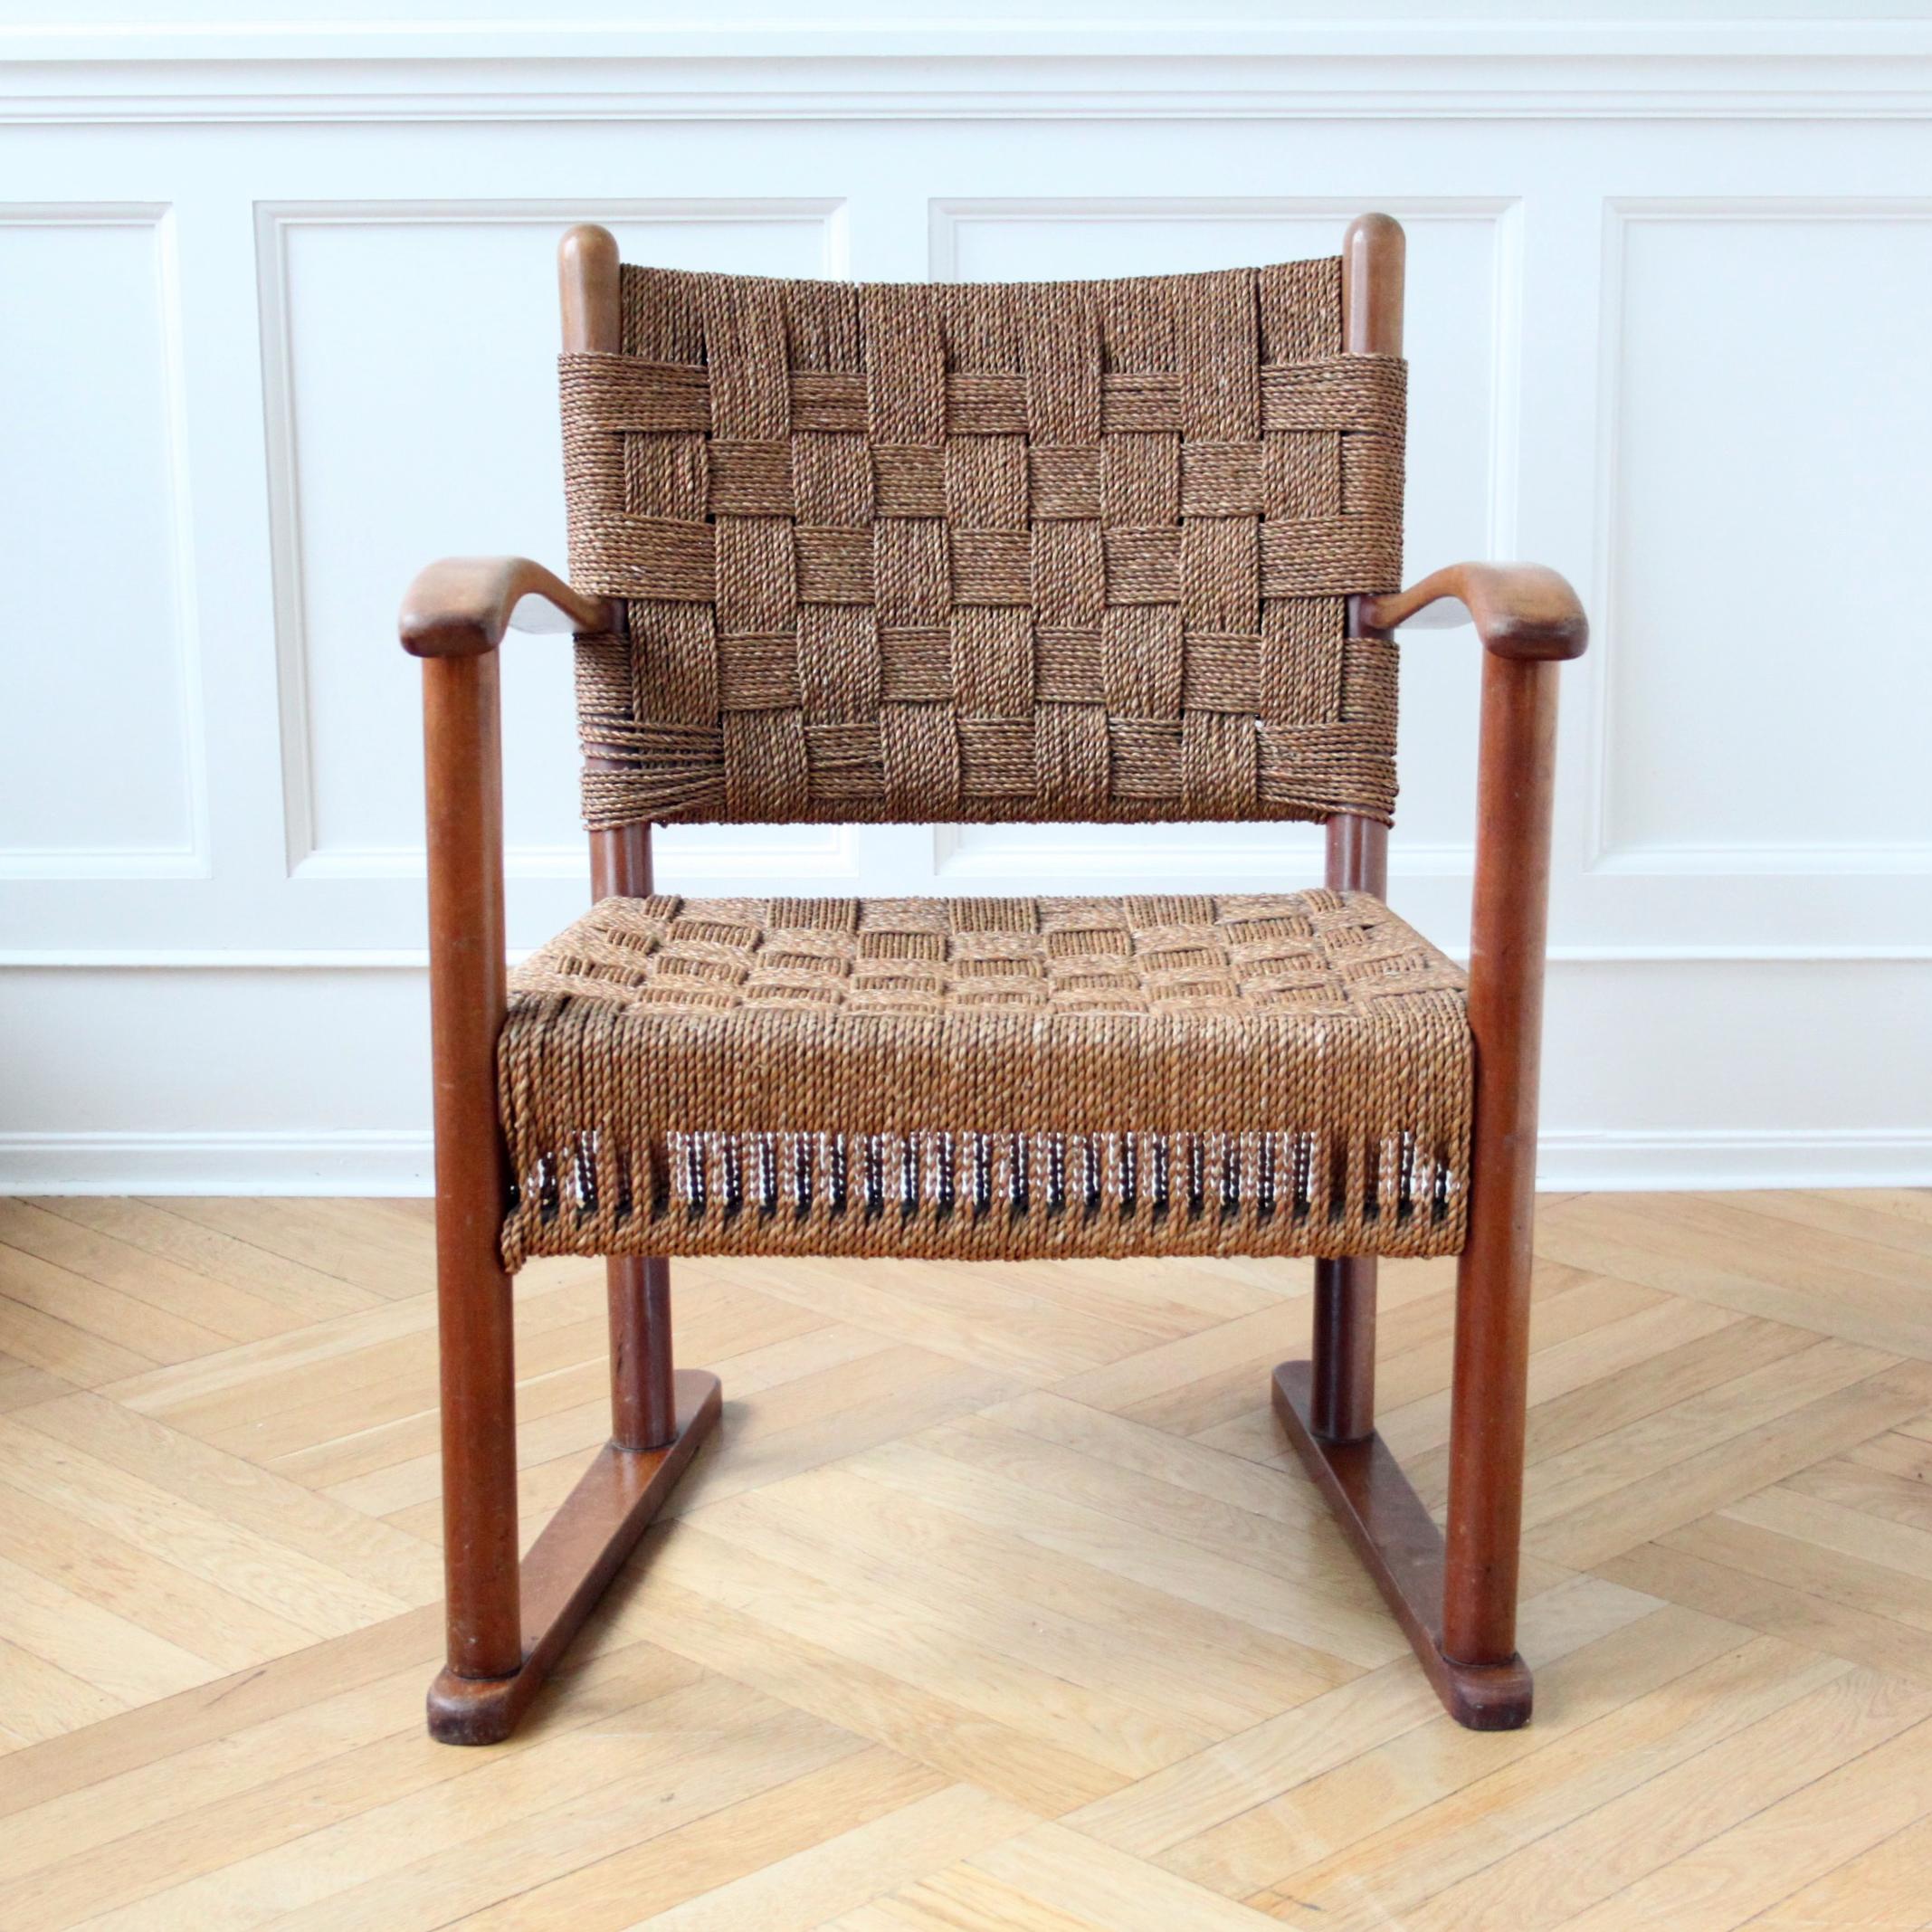 Fritz Hansen & Attributed. Frits Schlegel
Scandinavian Modern

A stunning and lounge chair in beech and seagrass made by Danish cabinetmaker Fritz Hansen in the 1940s, design attributed to Frits Schlegel. 

A very rare chair. Beech frame and